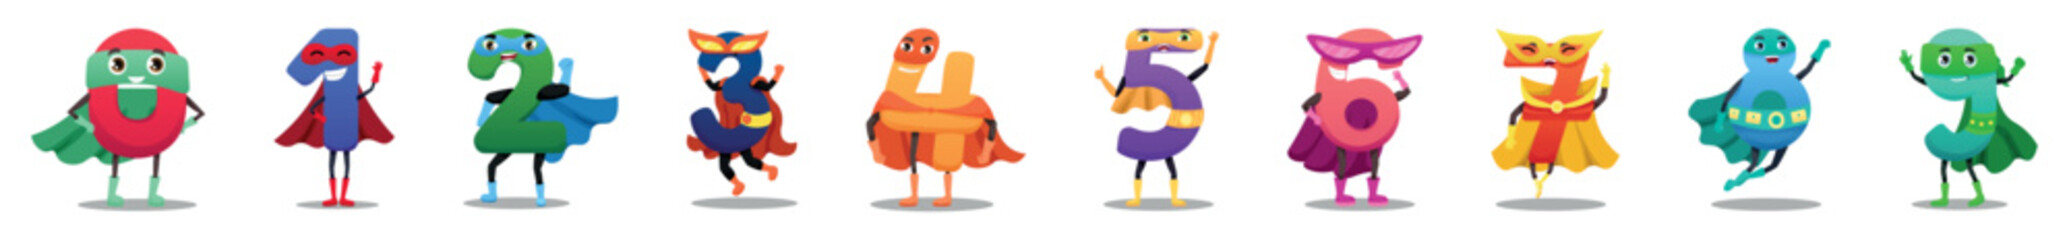 Set of figures in superhero costumes on white background